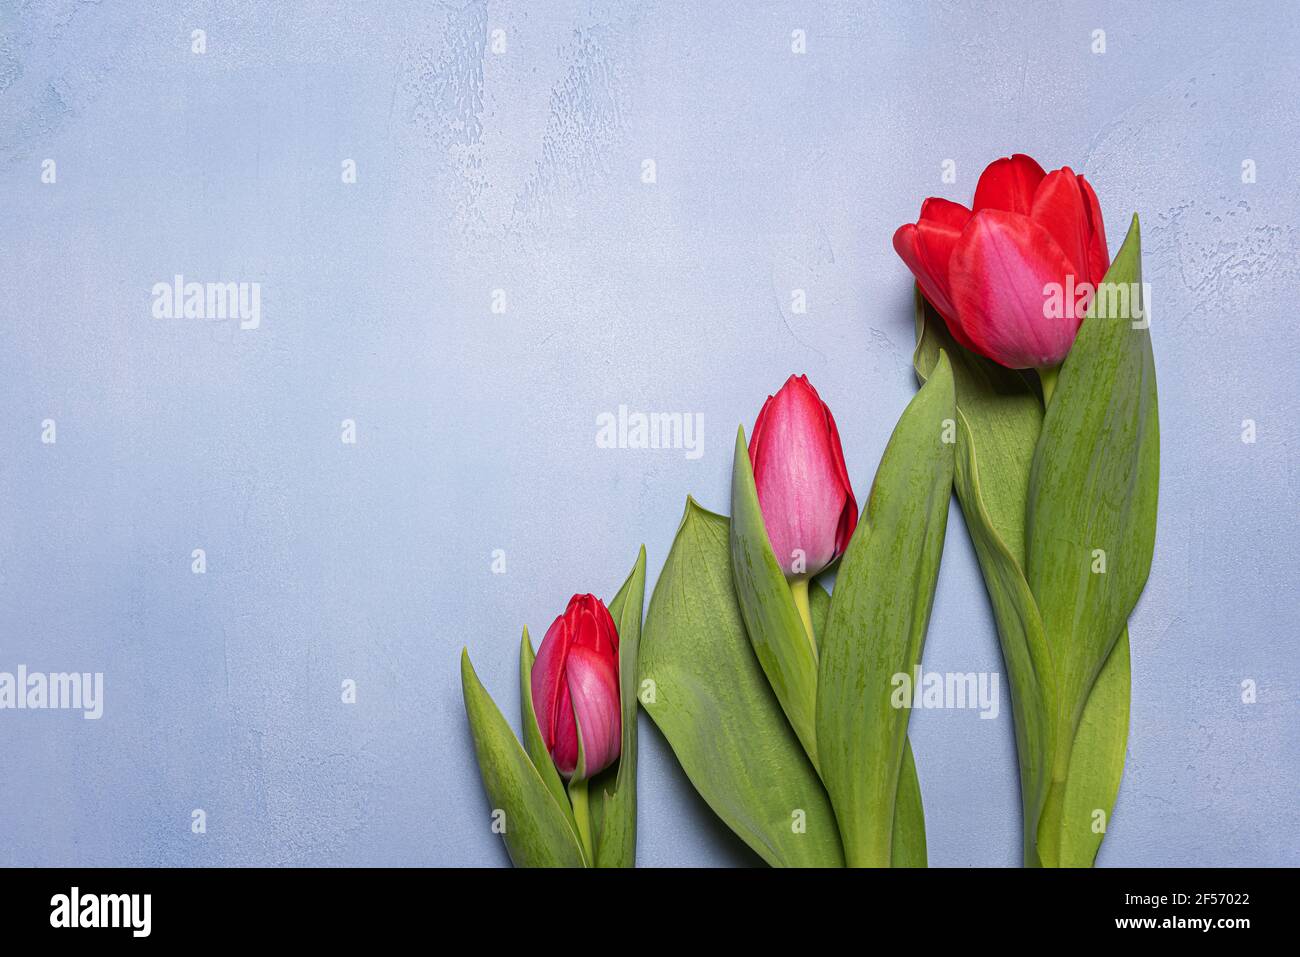 Three bright red and pink spring tulips with green leaves on blue textured concrete. Seasonal background with fresh natural flower flat lay and copy s Stock Photo